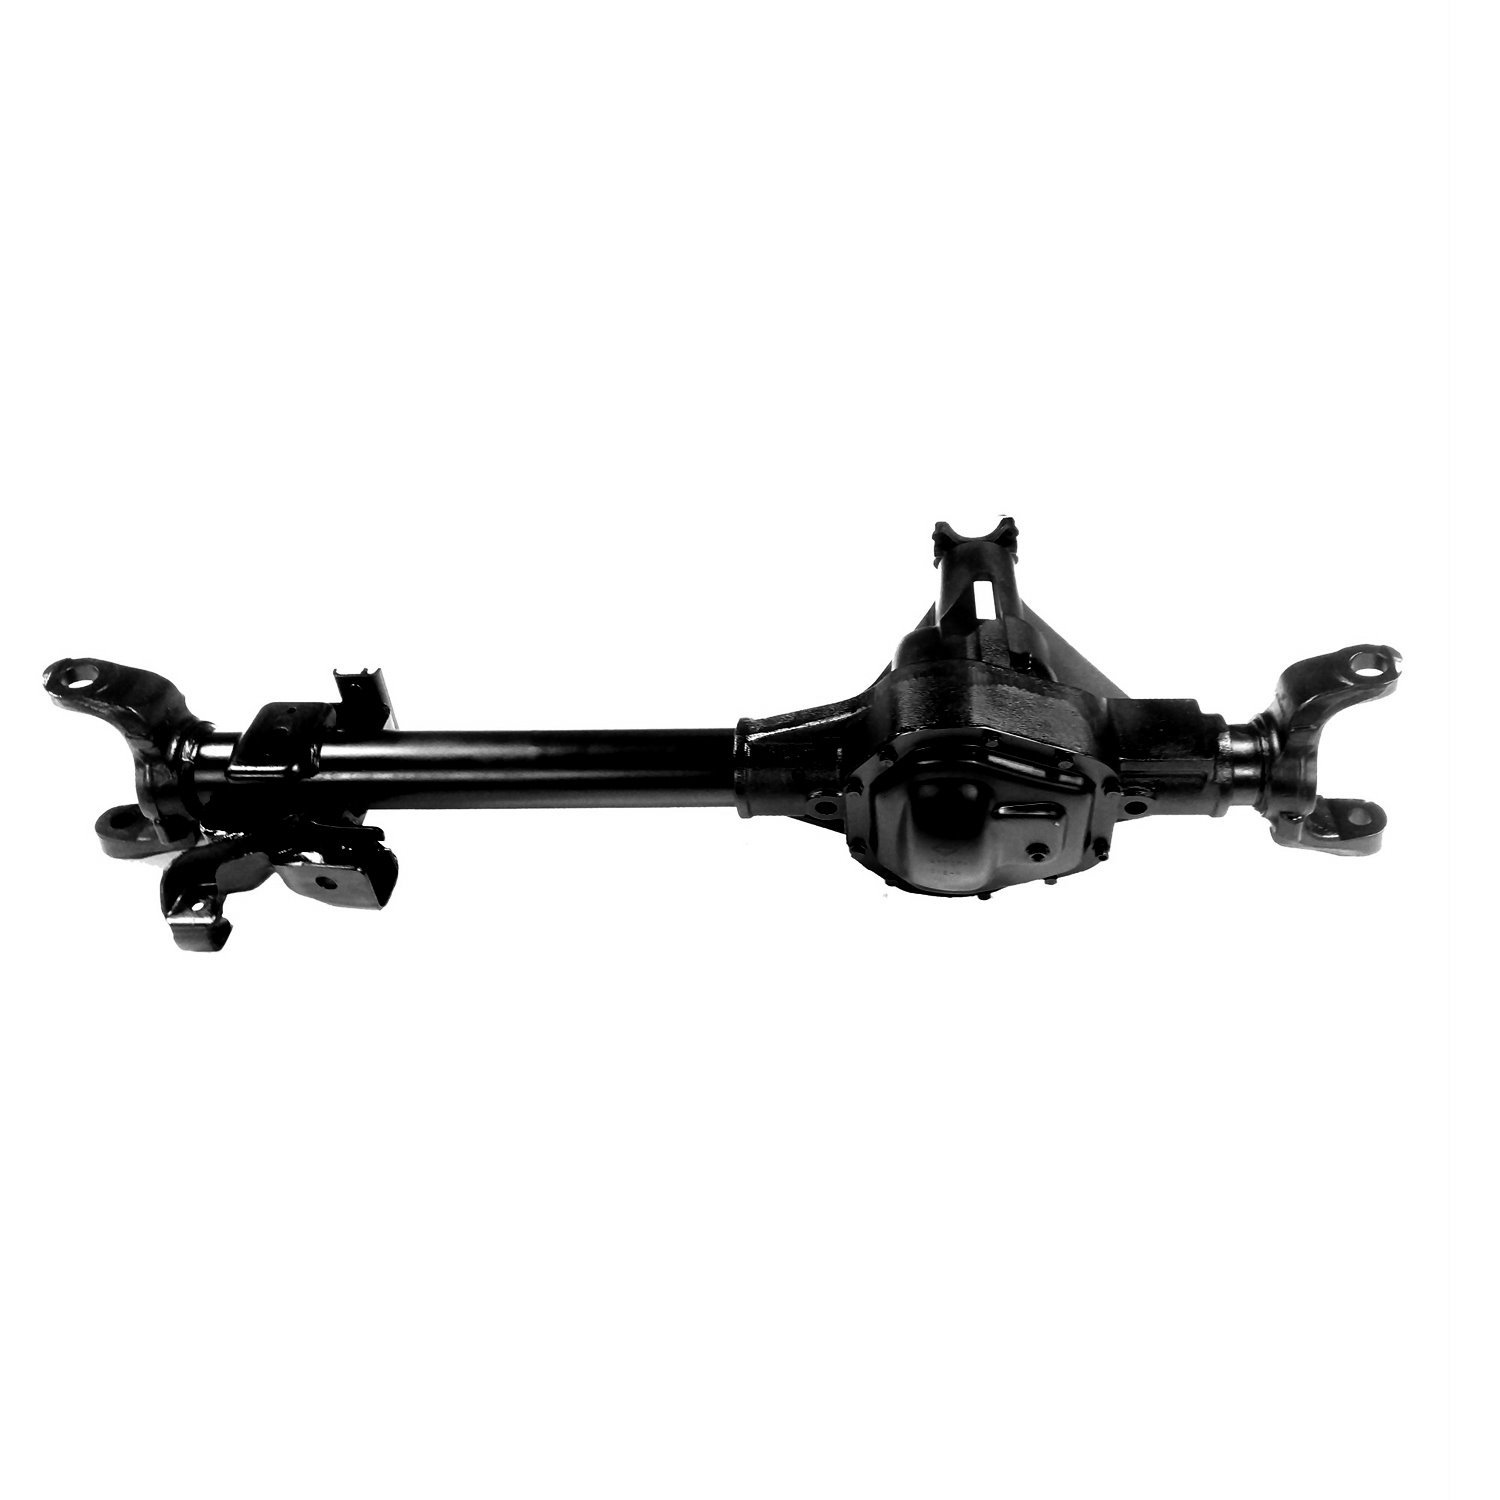 Remanufactured Complete Axle Assembly for Dana 60 08-10 Ford F250 & F350 3.73 Ratio, SRW